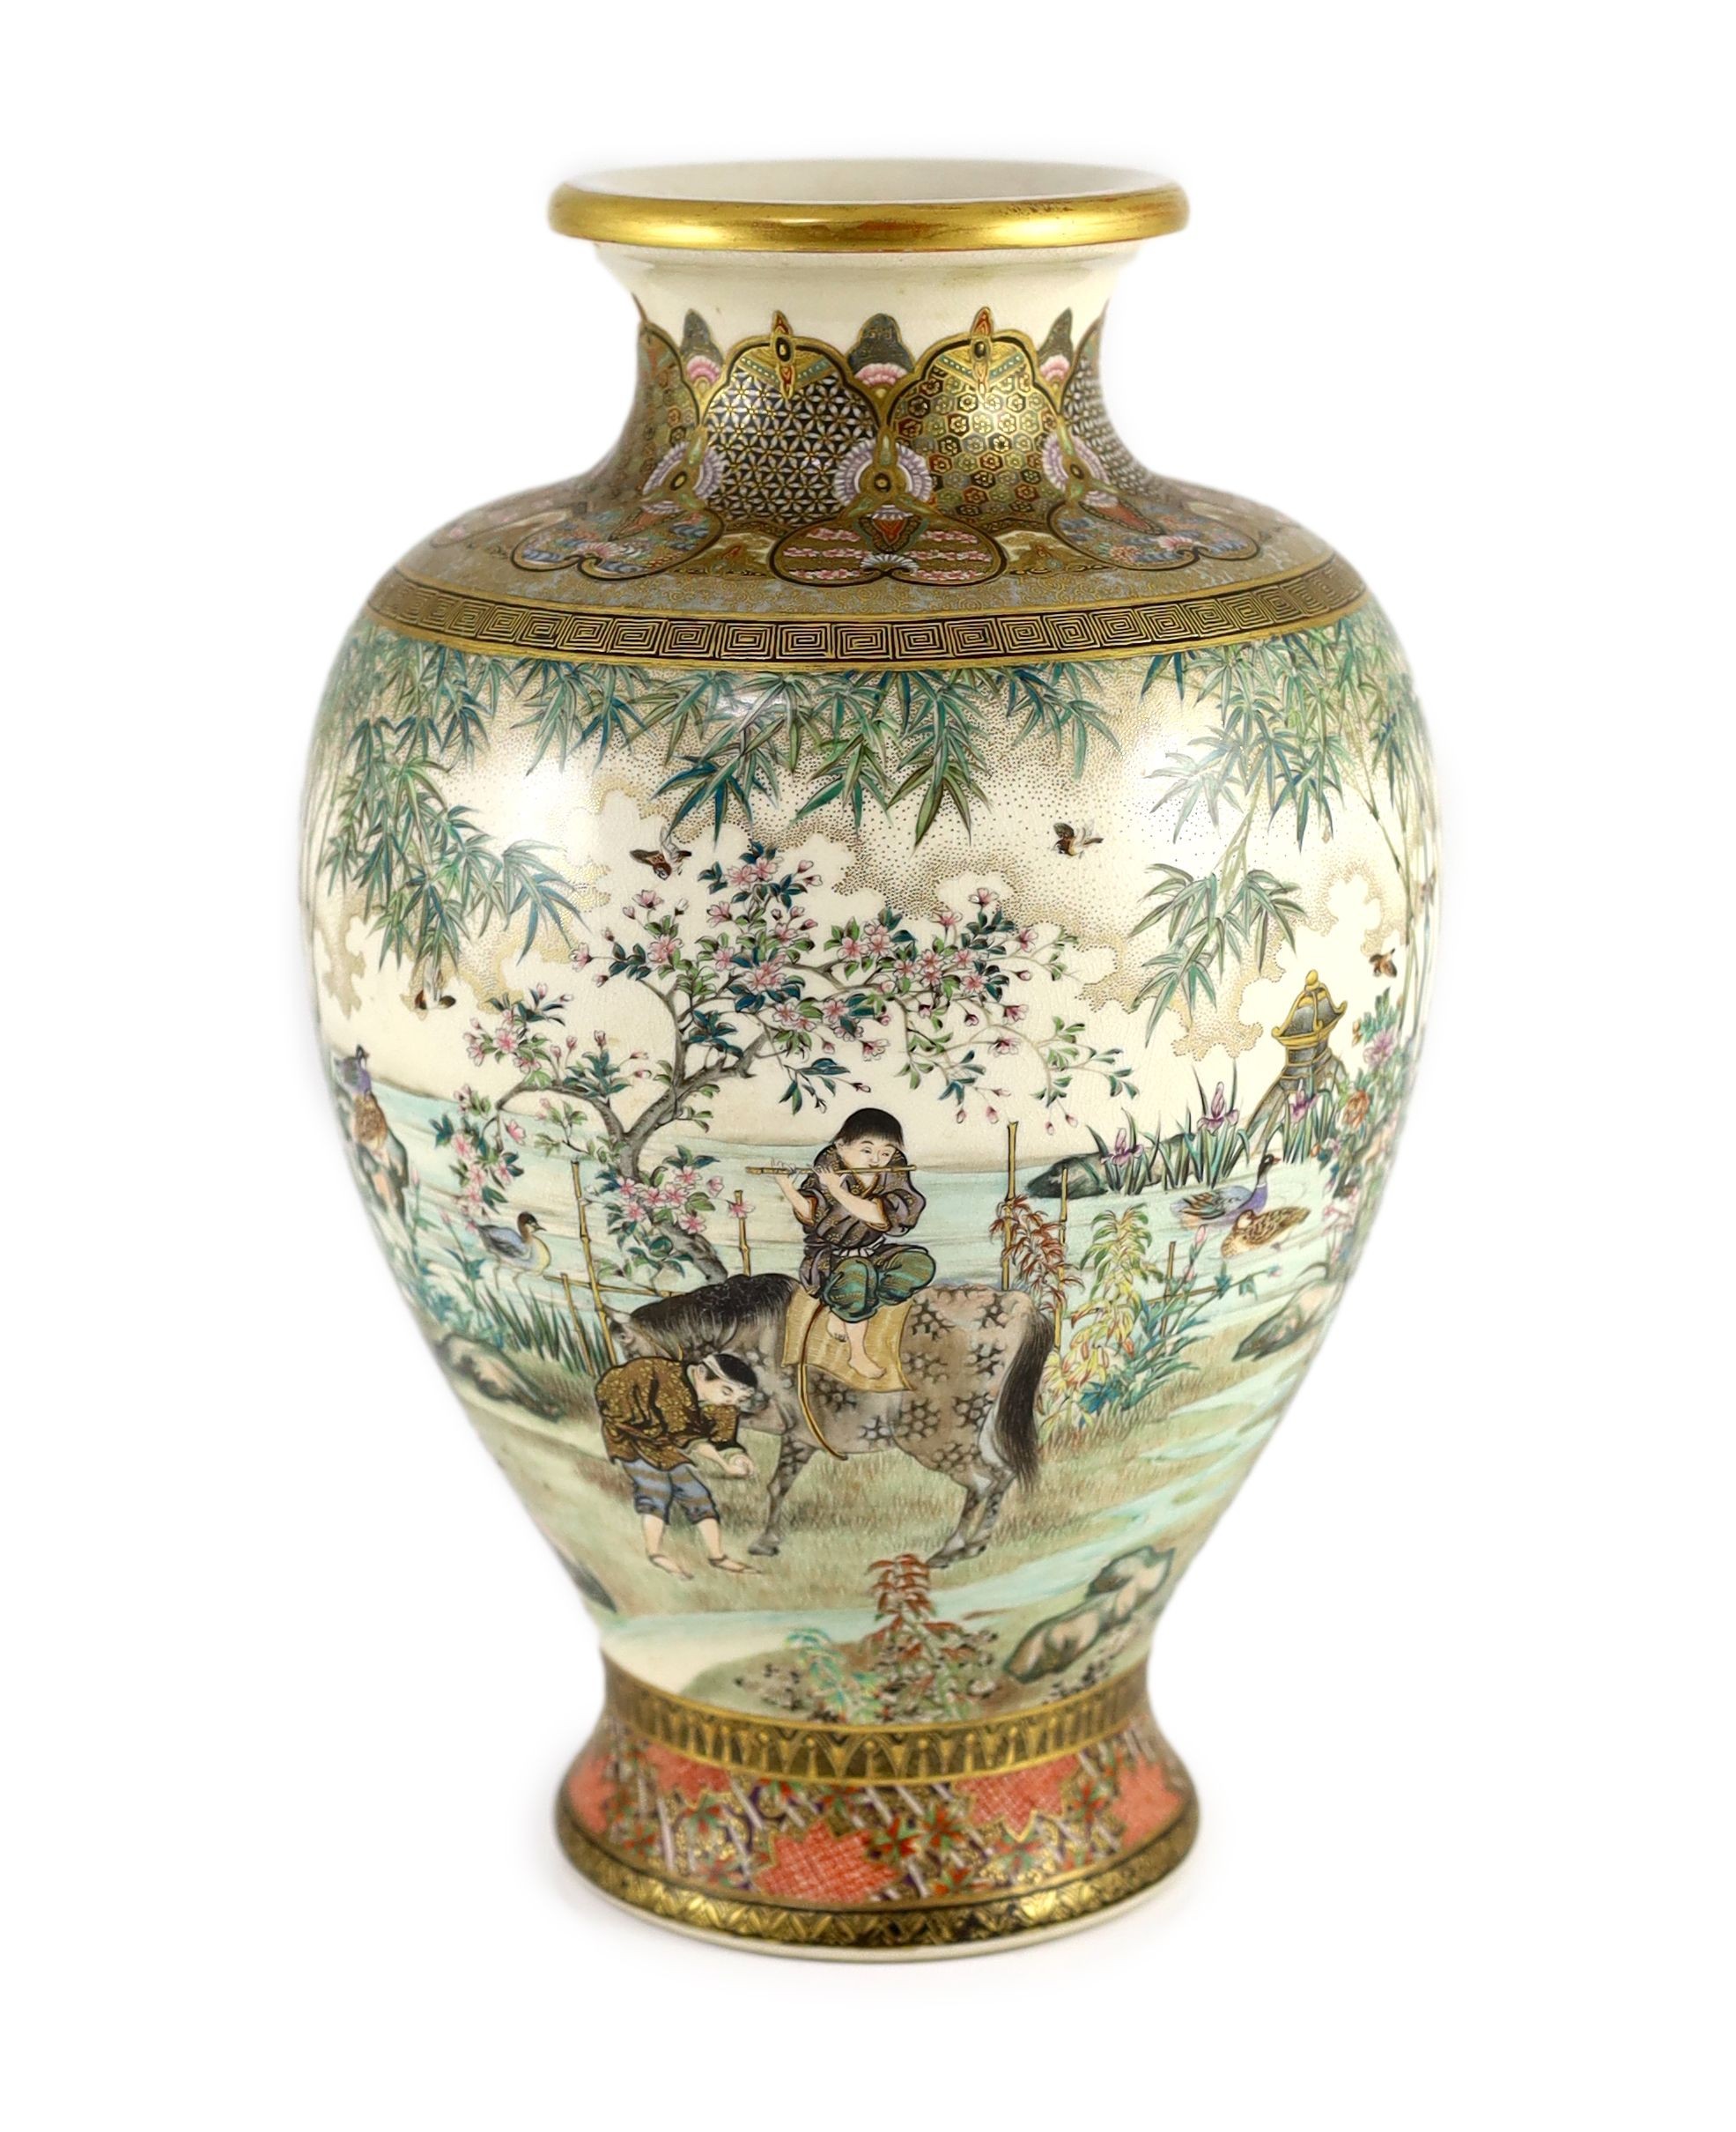 A fine Japanese Satsuma pottery vase, signed Takezan, Meiji period,finely painted with boys in a